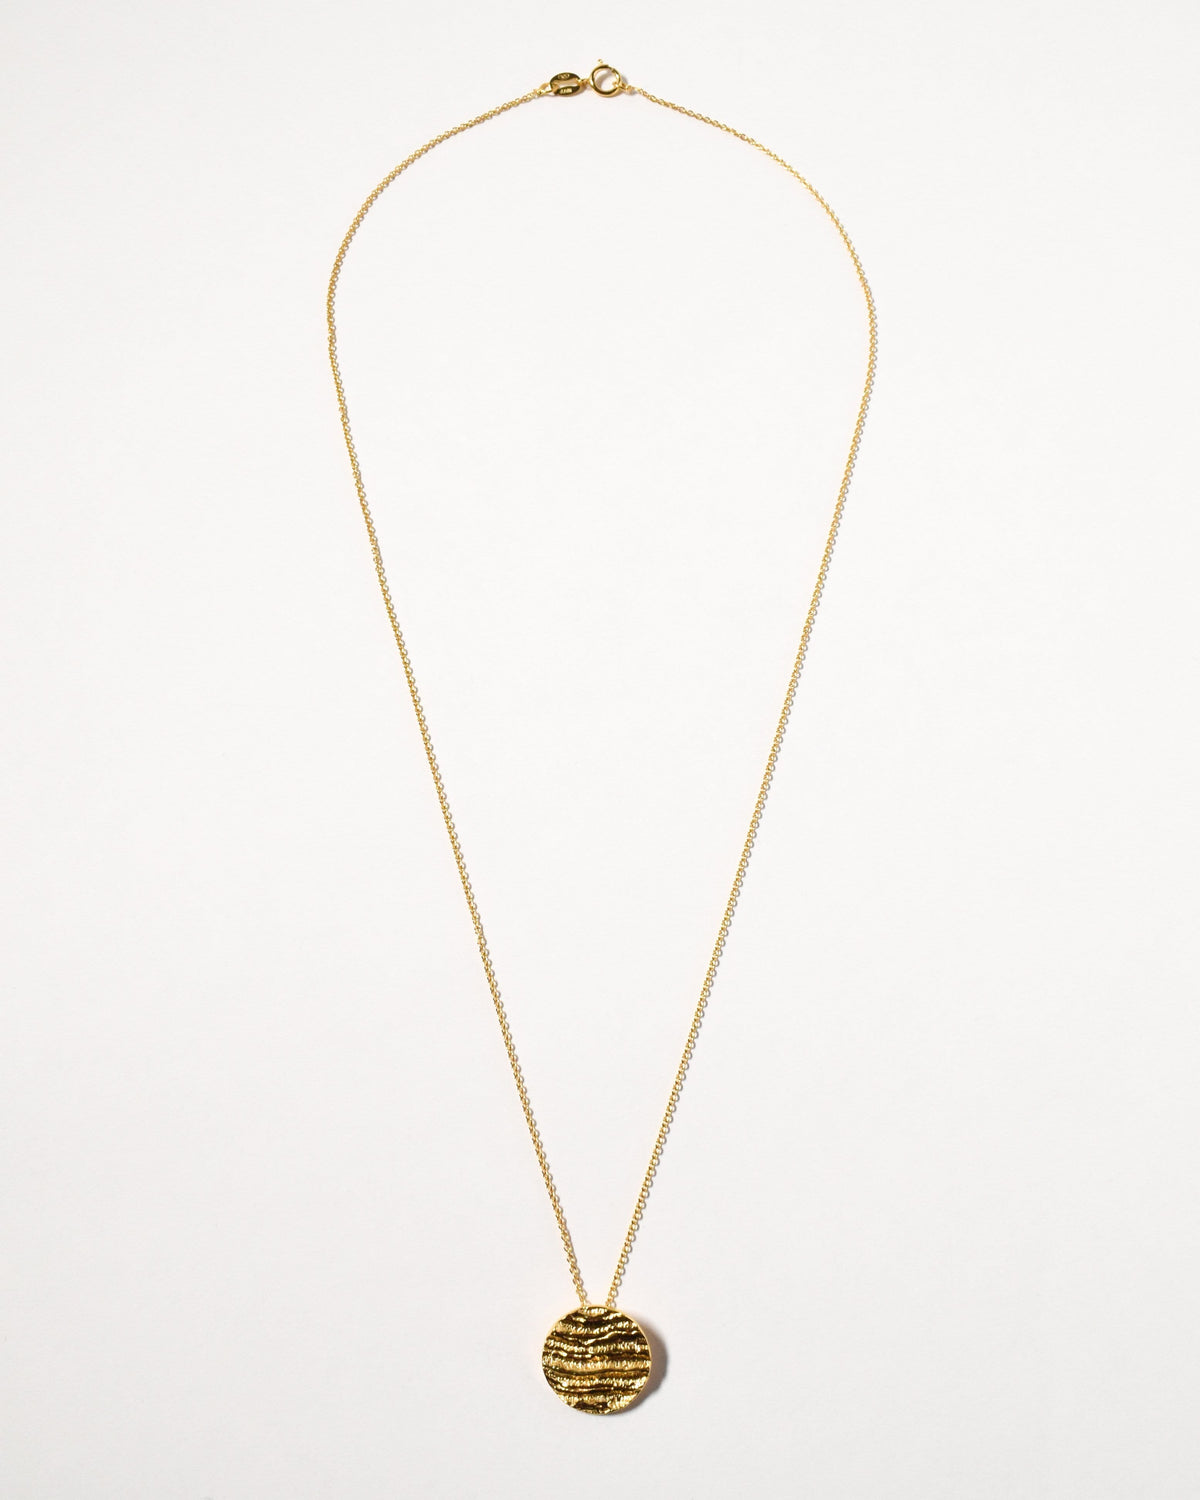 Kutti Necklace, Yellow Gold Plated